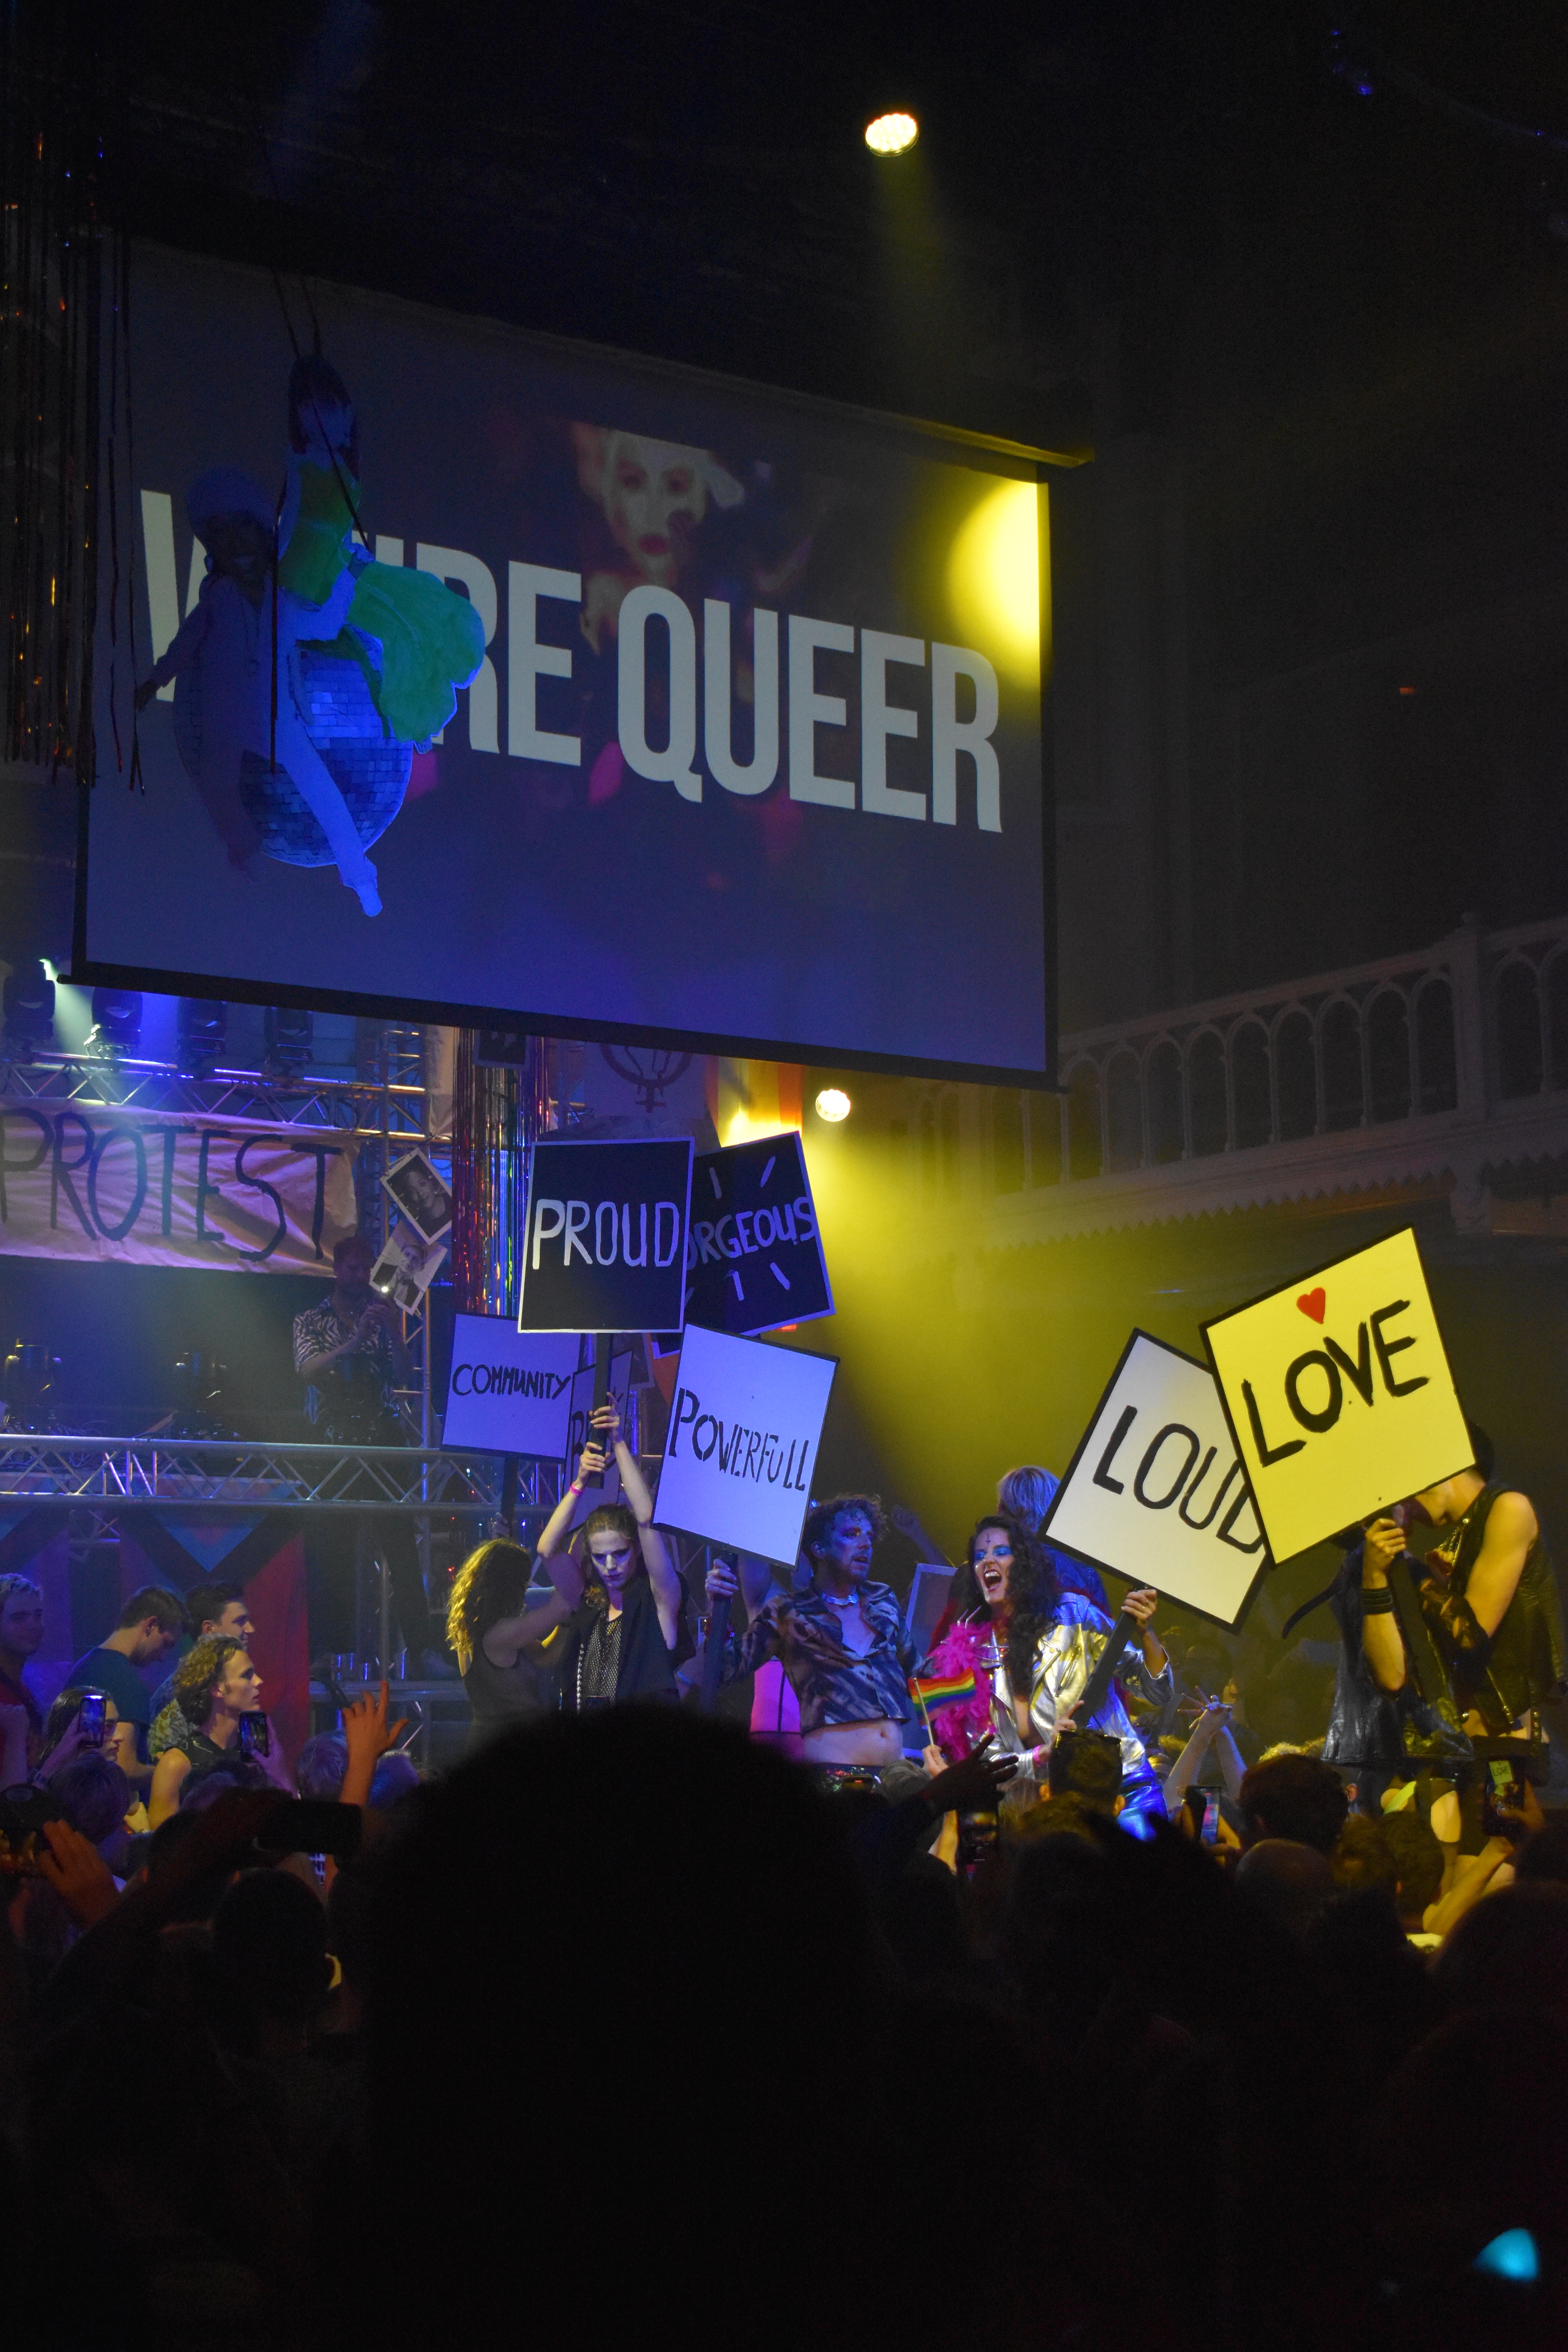 a concert during Amsterdam's Canal Pride festival at the historic Paradiso concert hall, with signs celebrating queer identities, love, and pride.